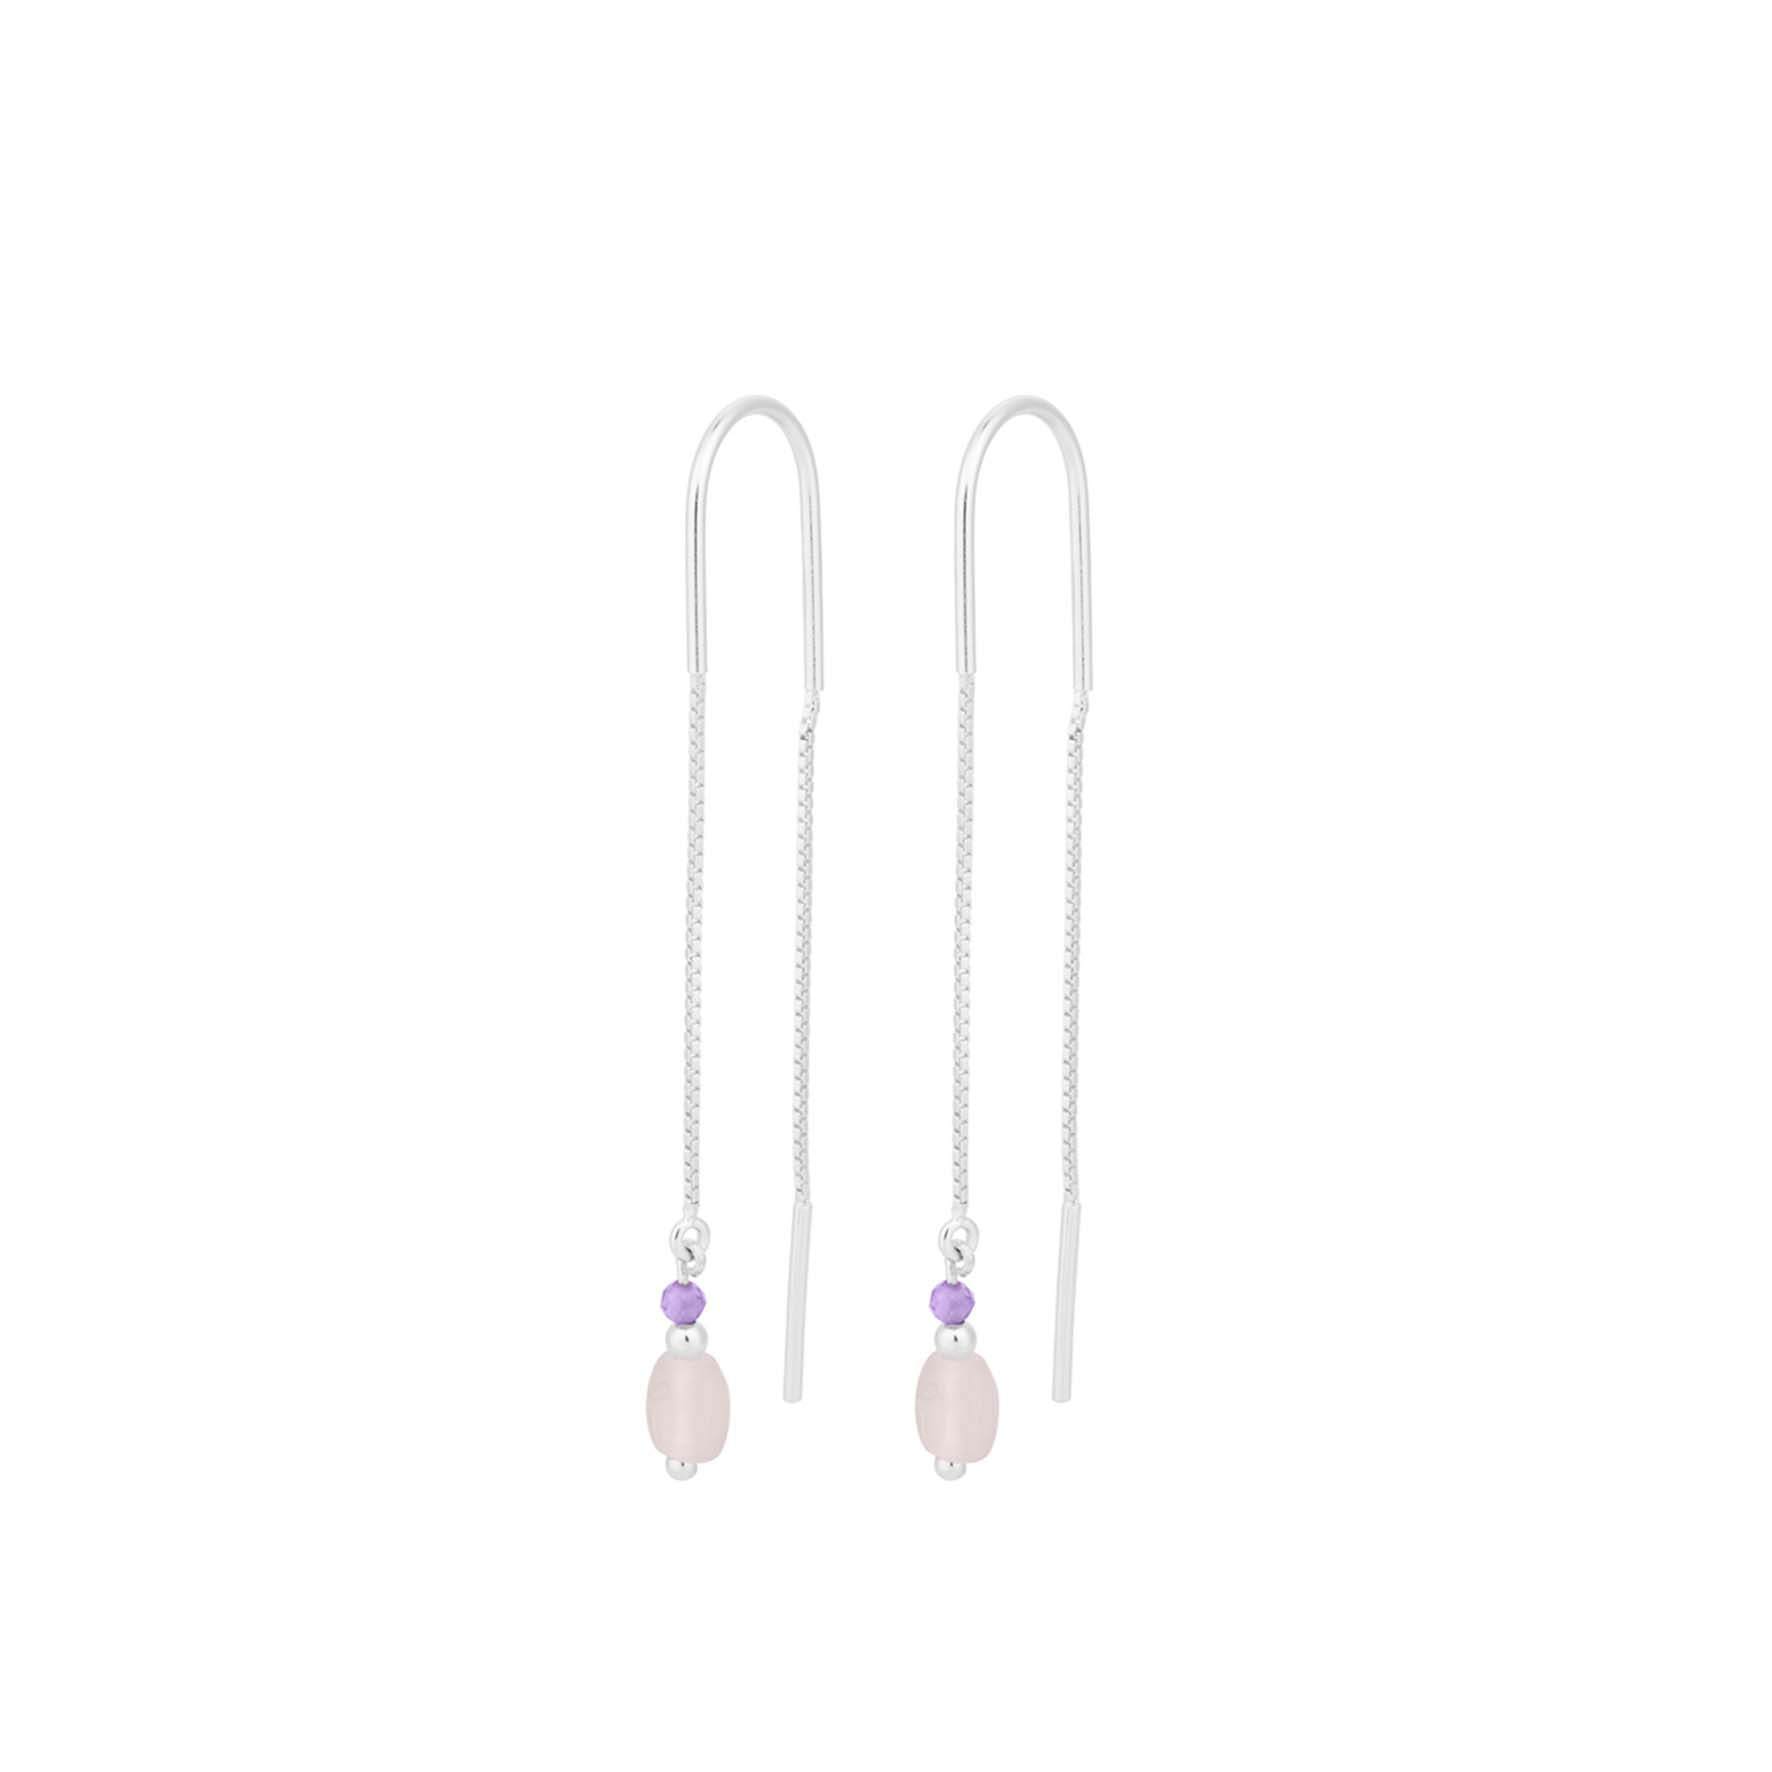 Cloudy Rose Earchains from Pernille Corydon in Silver Sterling 925